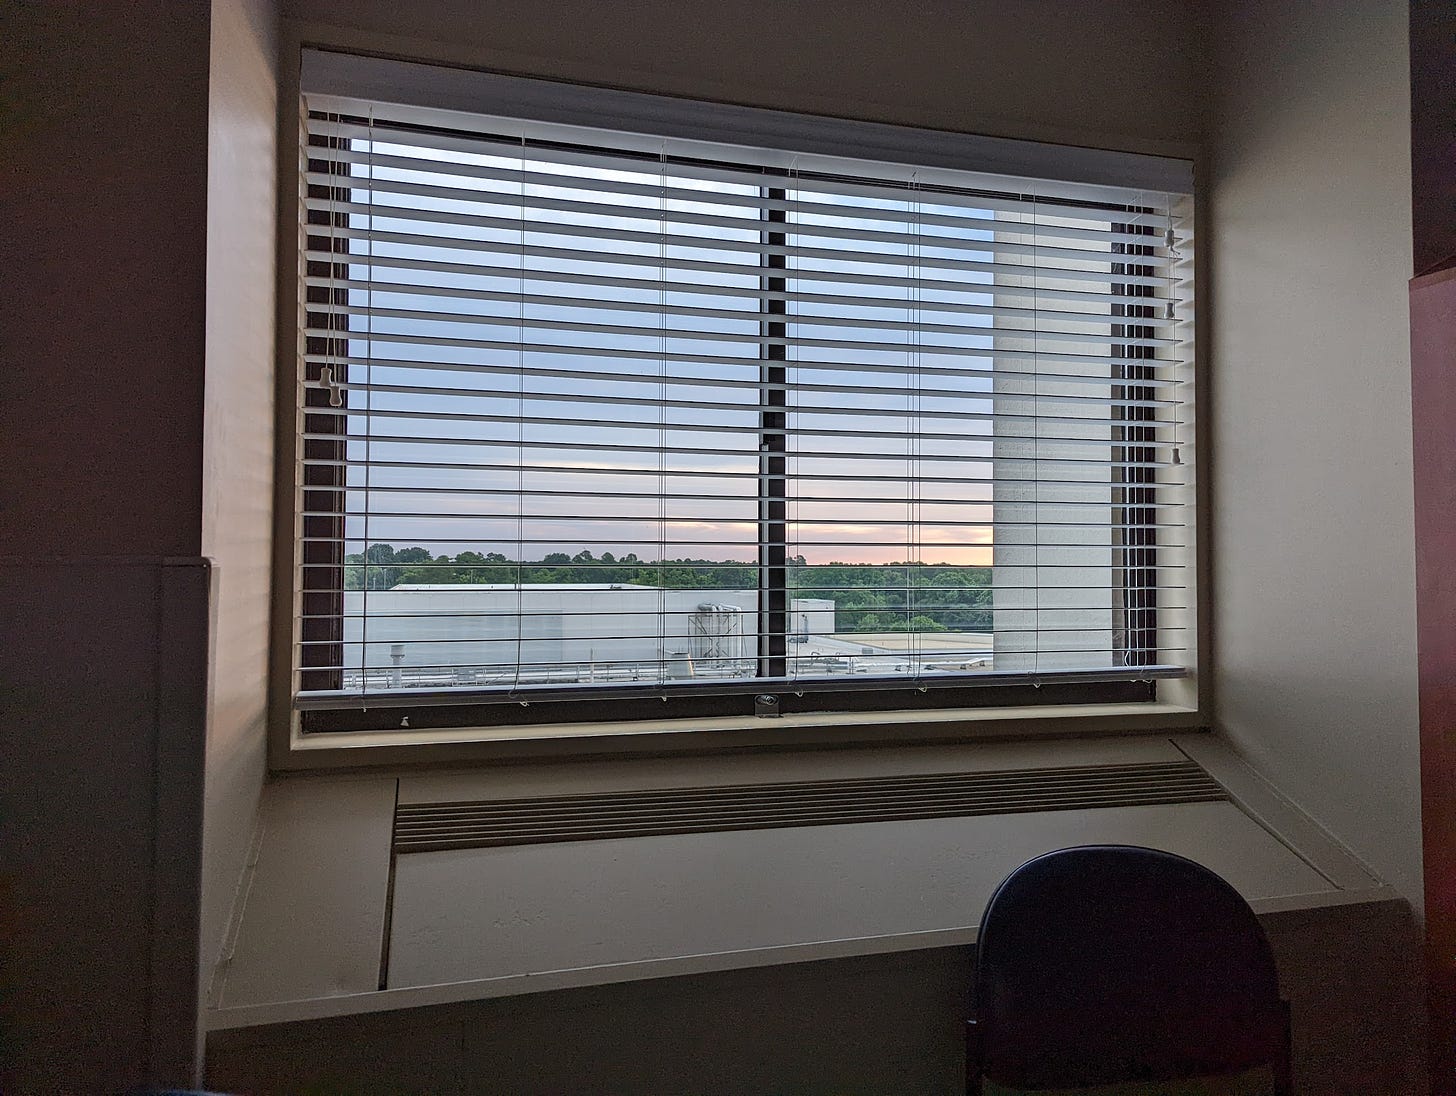 A window with blinds and a built-in AC unit. The view is of industrial HVAC equipment on a roof painted white, a tree line in the distance, and the sun rising through some clouds.